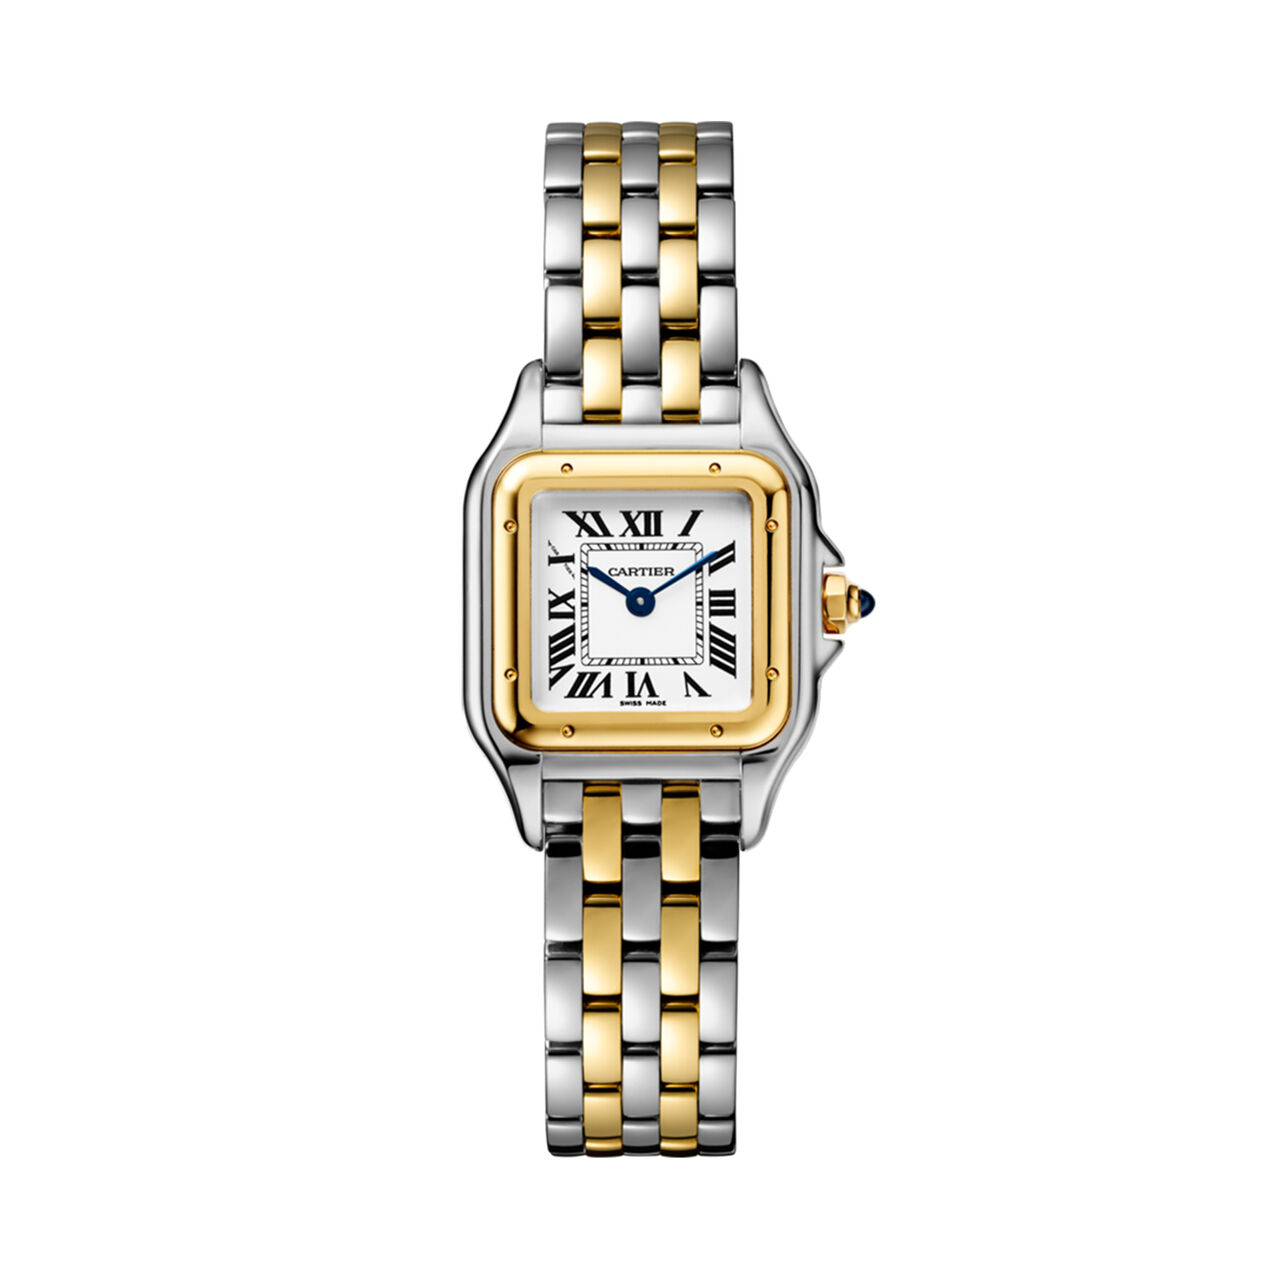 maison birks panthere de cartier watch small model yellow gold steel w2pn0006 image number 0